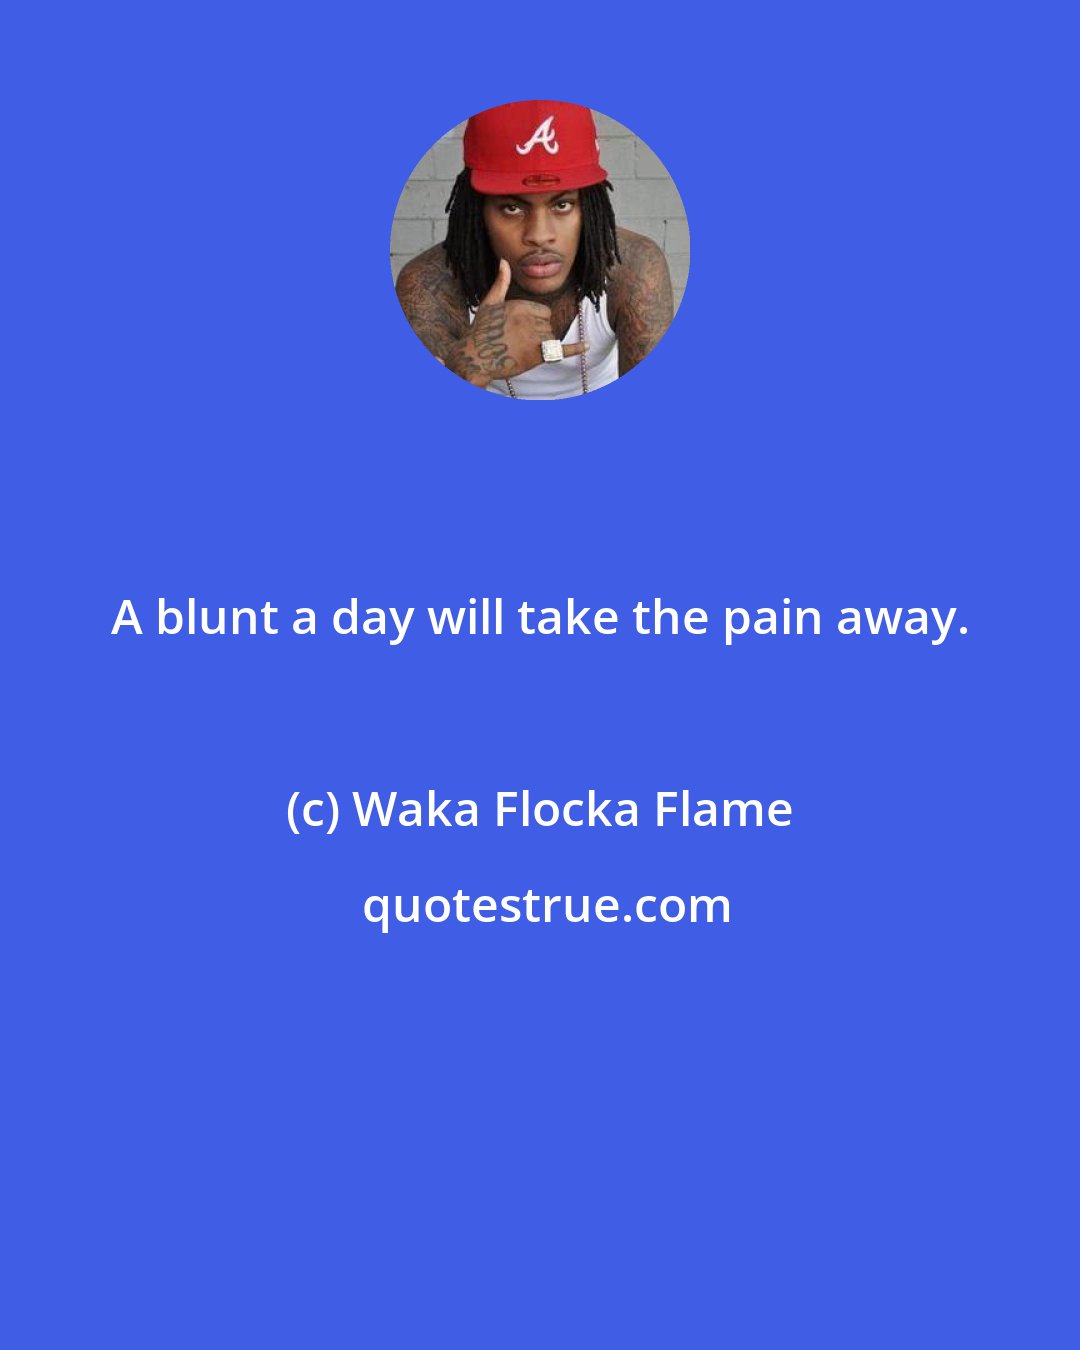 Waka Flocka Flame: A blunt a day will take the pain away.